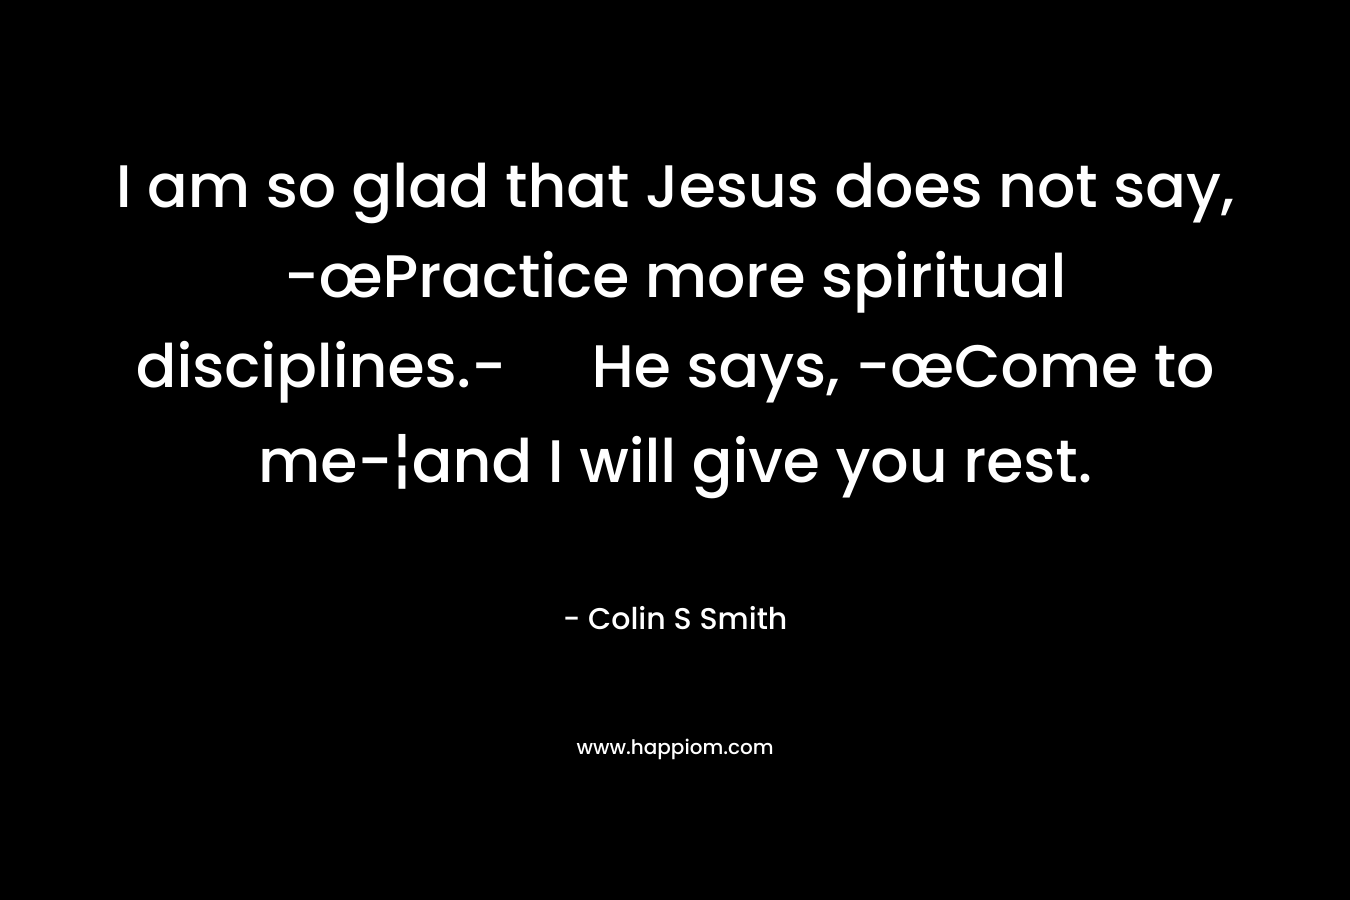 I am so glad that Jesus does not say, -œPractice more spiritual disciplines.- He says, -œCome to me-¦and I will give you rest. – Colin S Smith